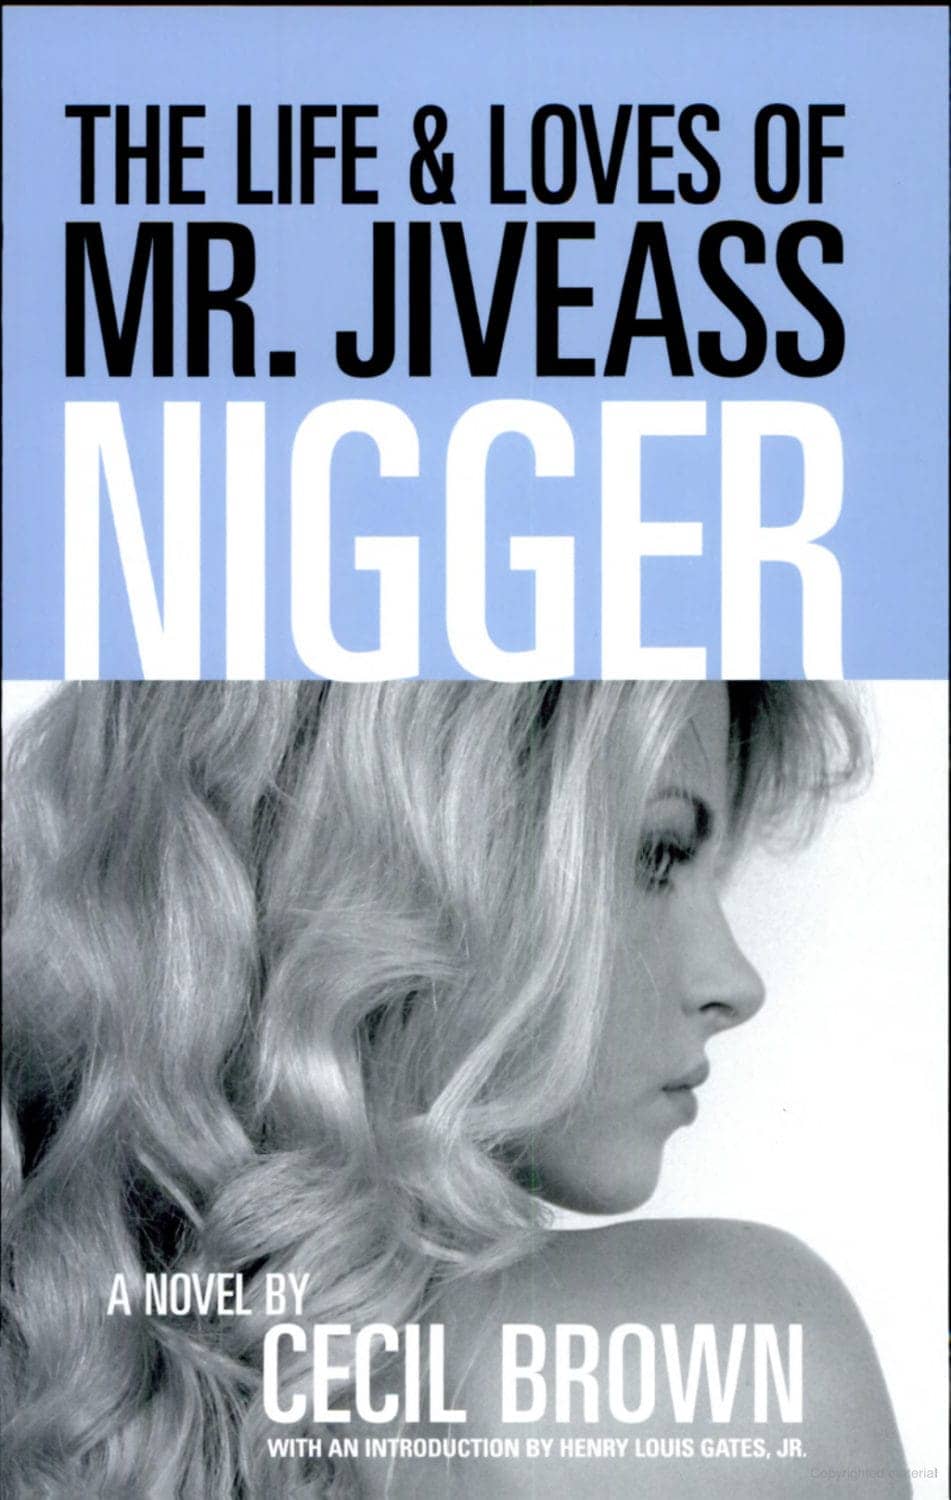 The-Life-and-Loves-of-Mr.-Jiveass-Nigger-by-Cecil-Brown-cover, Johnny Depp: Huckleberry Finn at 59 , Culture Currents Featured 